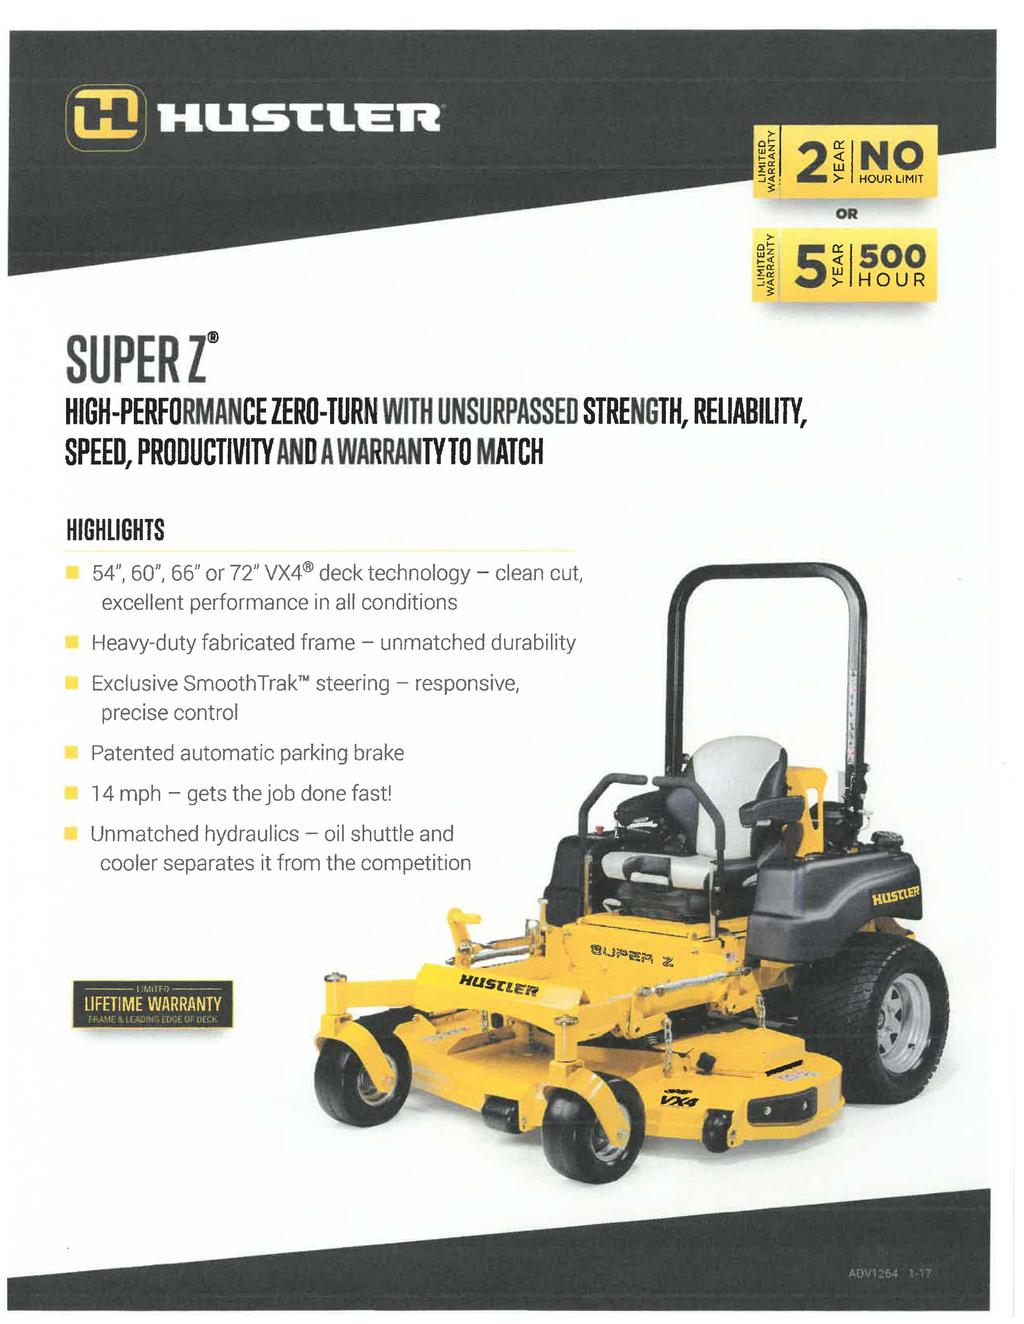 SUPERt HIGH-PERFORMAN CE ZERO-TURN WITH UNSURPASSED STRENGTH, RELIABILITY, SPEED, PRODUCTIVITY AND A WARRANTY TO MATCH HIGHLIGHTS 54", 60 1 ', 66" or 72" VX4 deck technology - clean cut, excellent